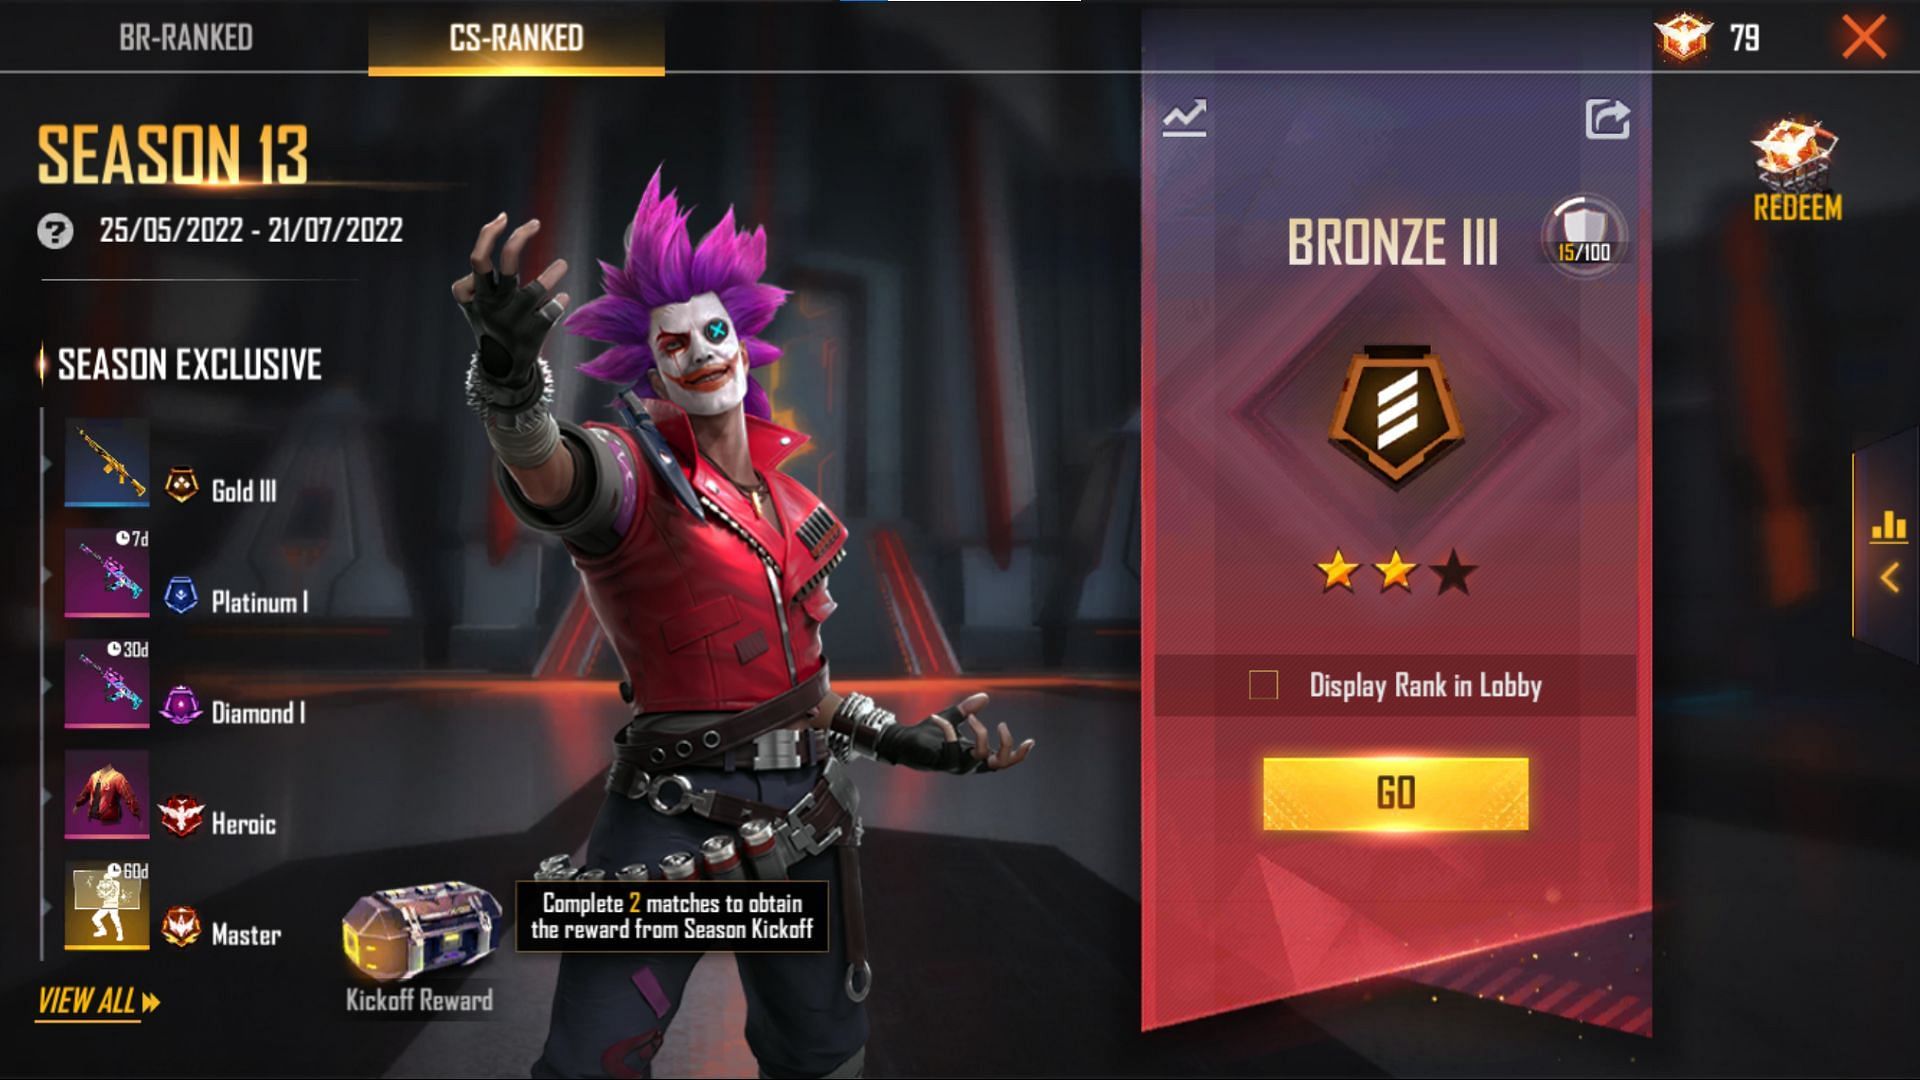 Free Fire Max Menu Ob35 Update Today,100% Rank+Fly+Vbadge, Free